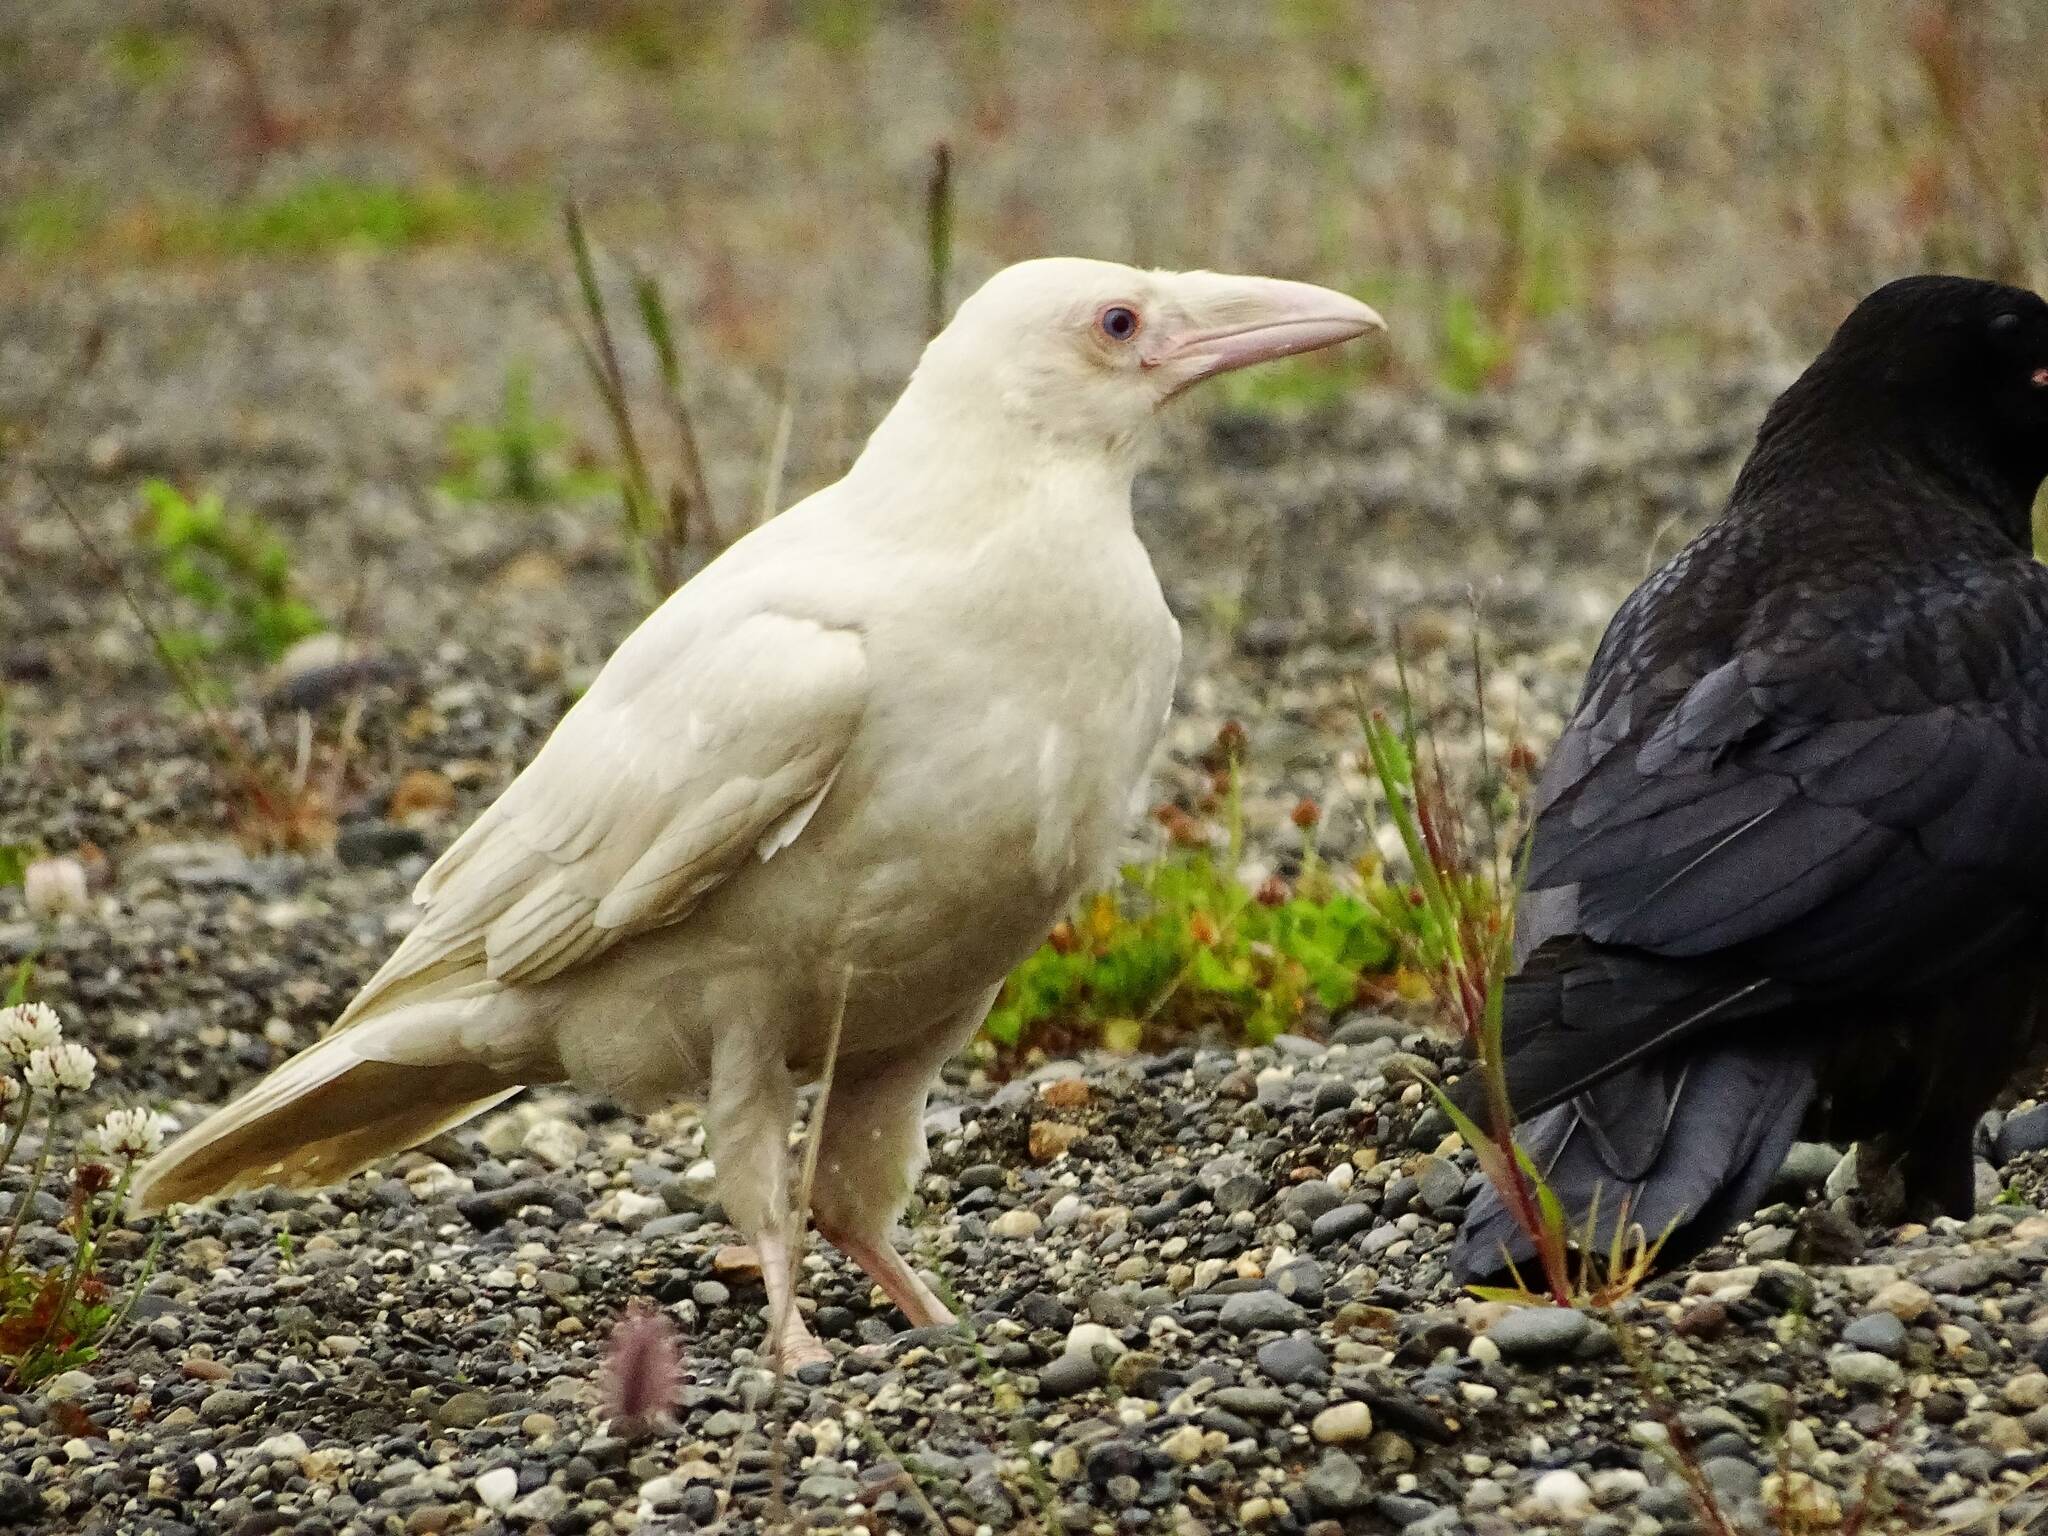 A leucistic raven, distinct for its white coloration, is photographed north of Kenai. (Photo courtesy Gregory Messimer)